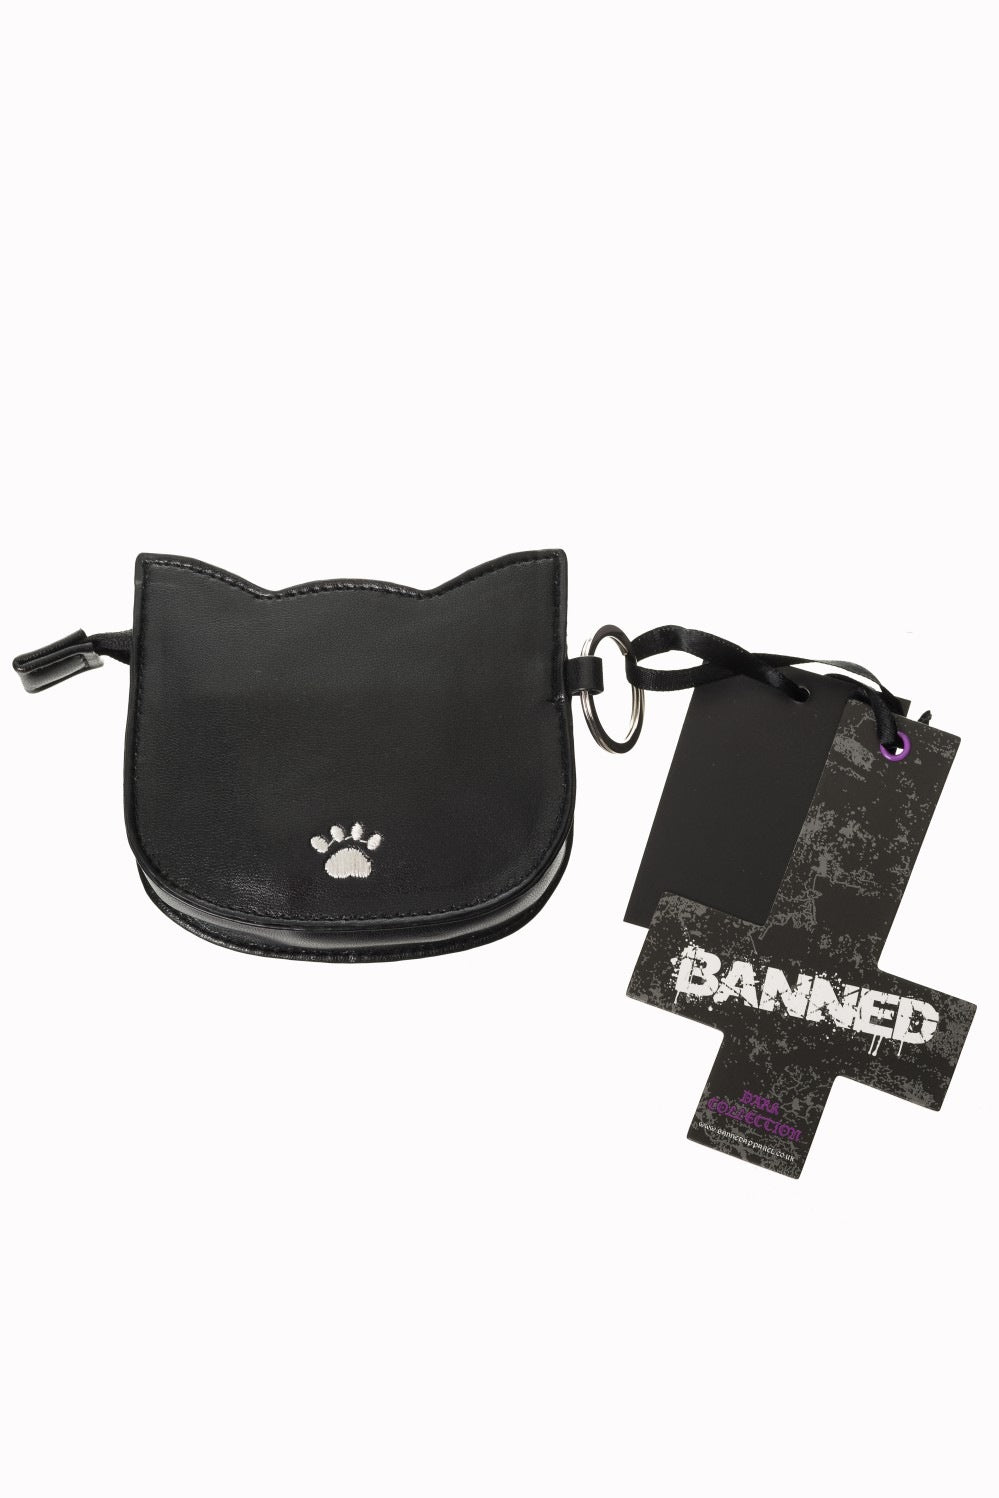 Back of cat head shaped coin purse with white paw print on and banned alternative label 